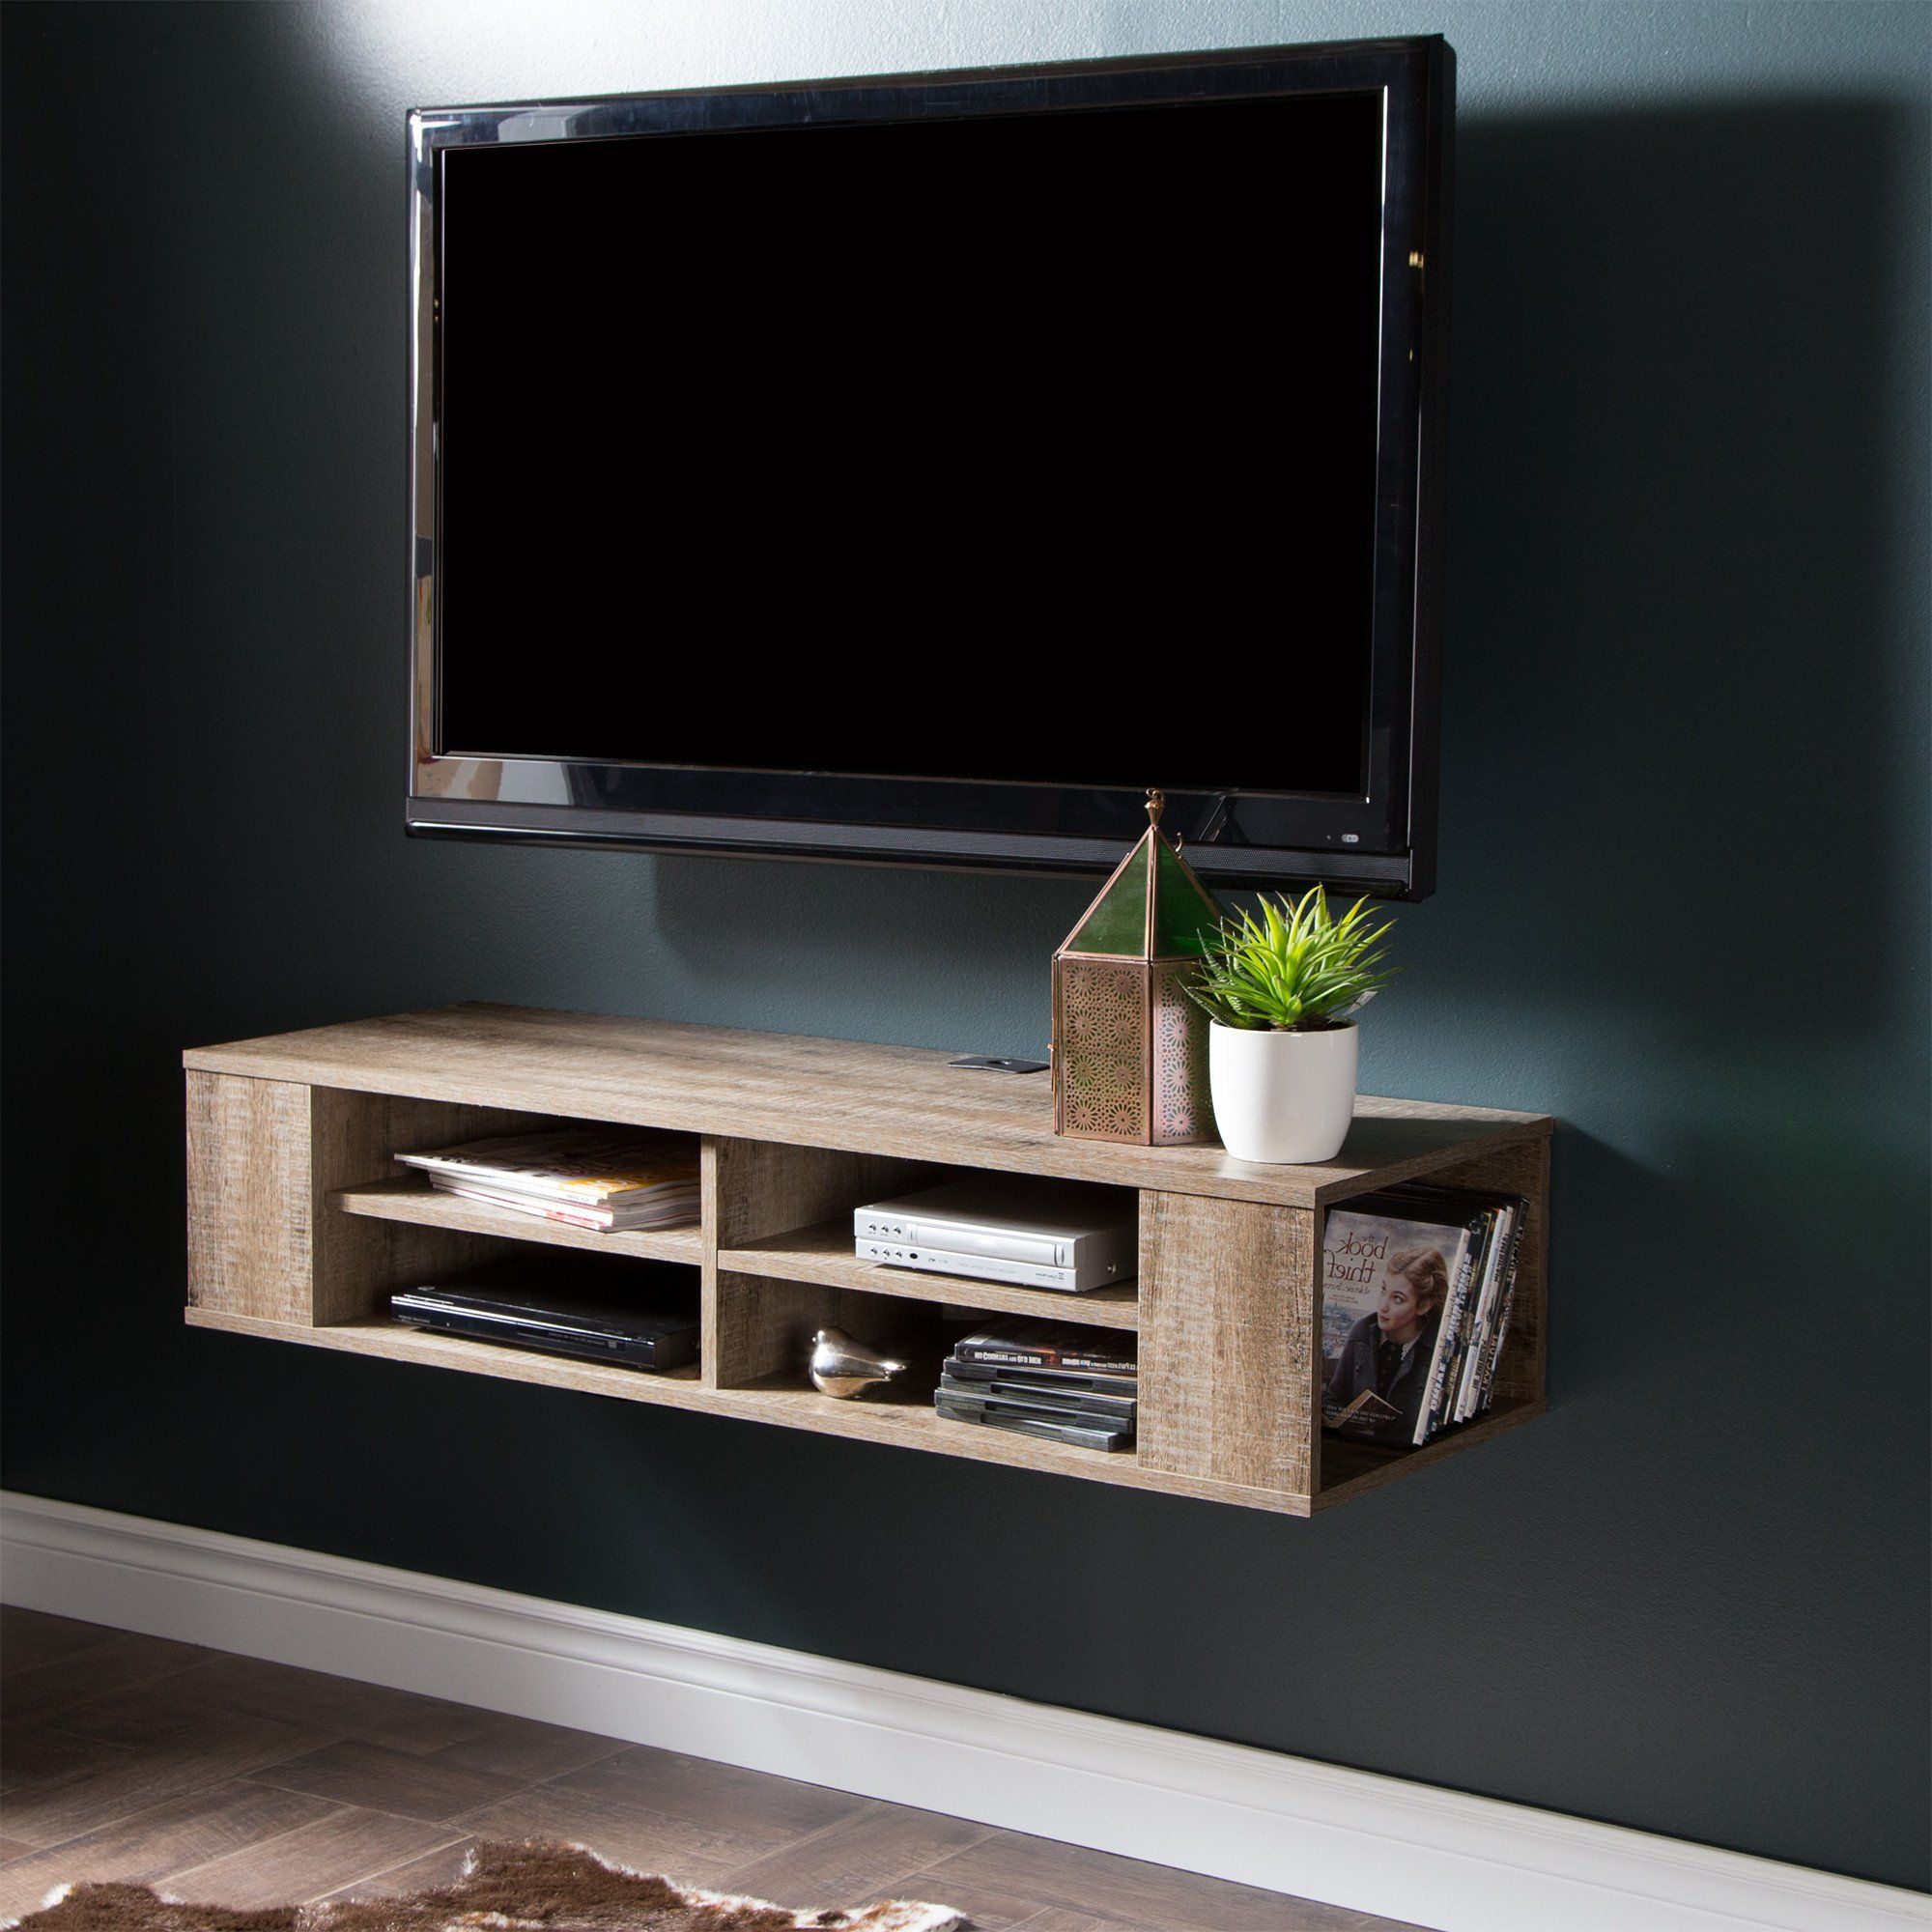 City Life 48" Wall Mounted Media Console Pertaining To Console Under Wall Mounted Tv (View 6 of 15)